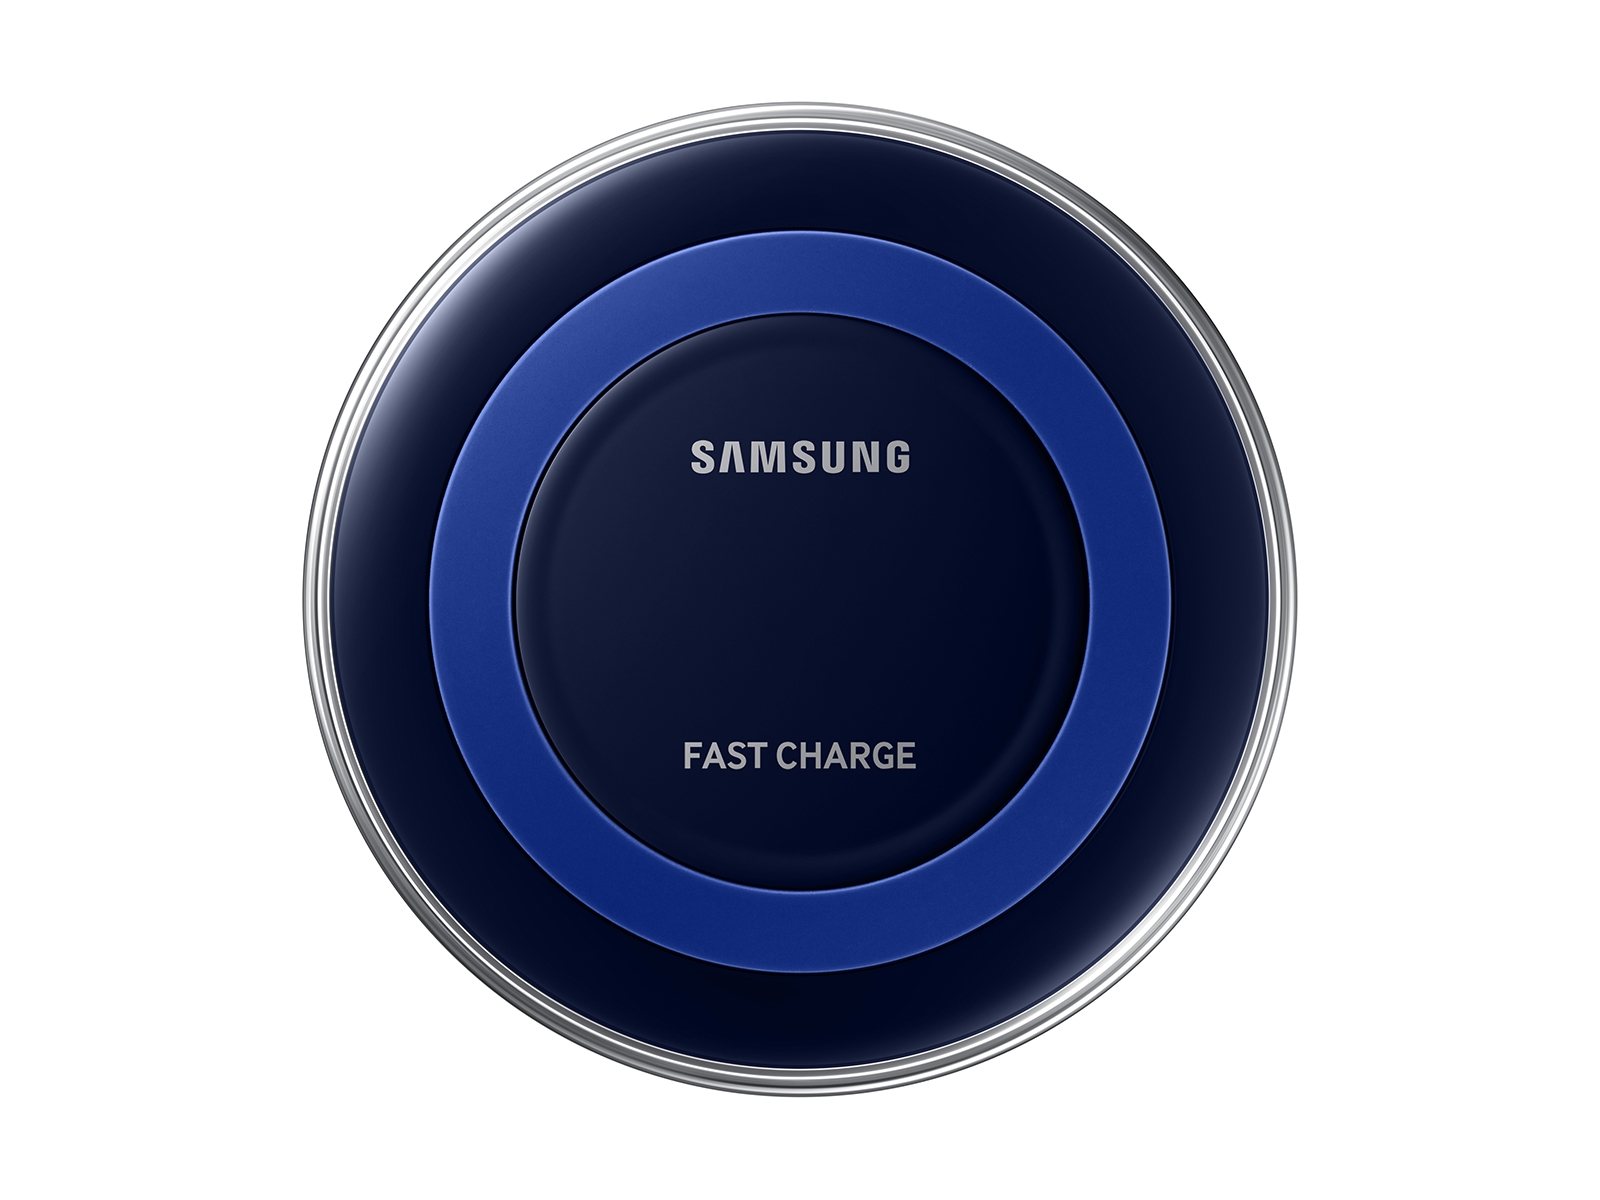 Fast Charge Wireless Charging Pad Mobile Accessories - EP-PN920TCEGUS |  Samsung US